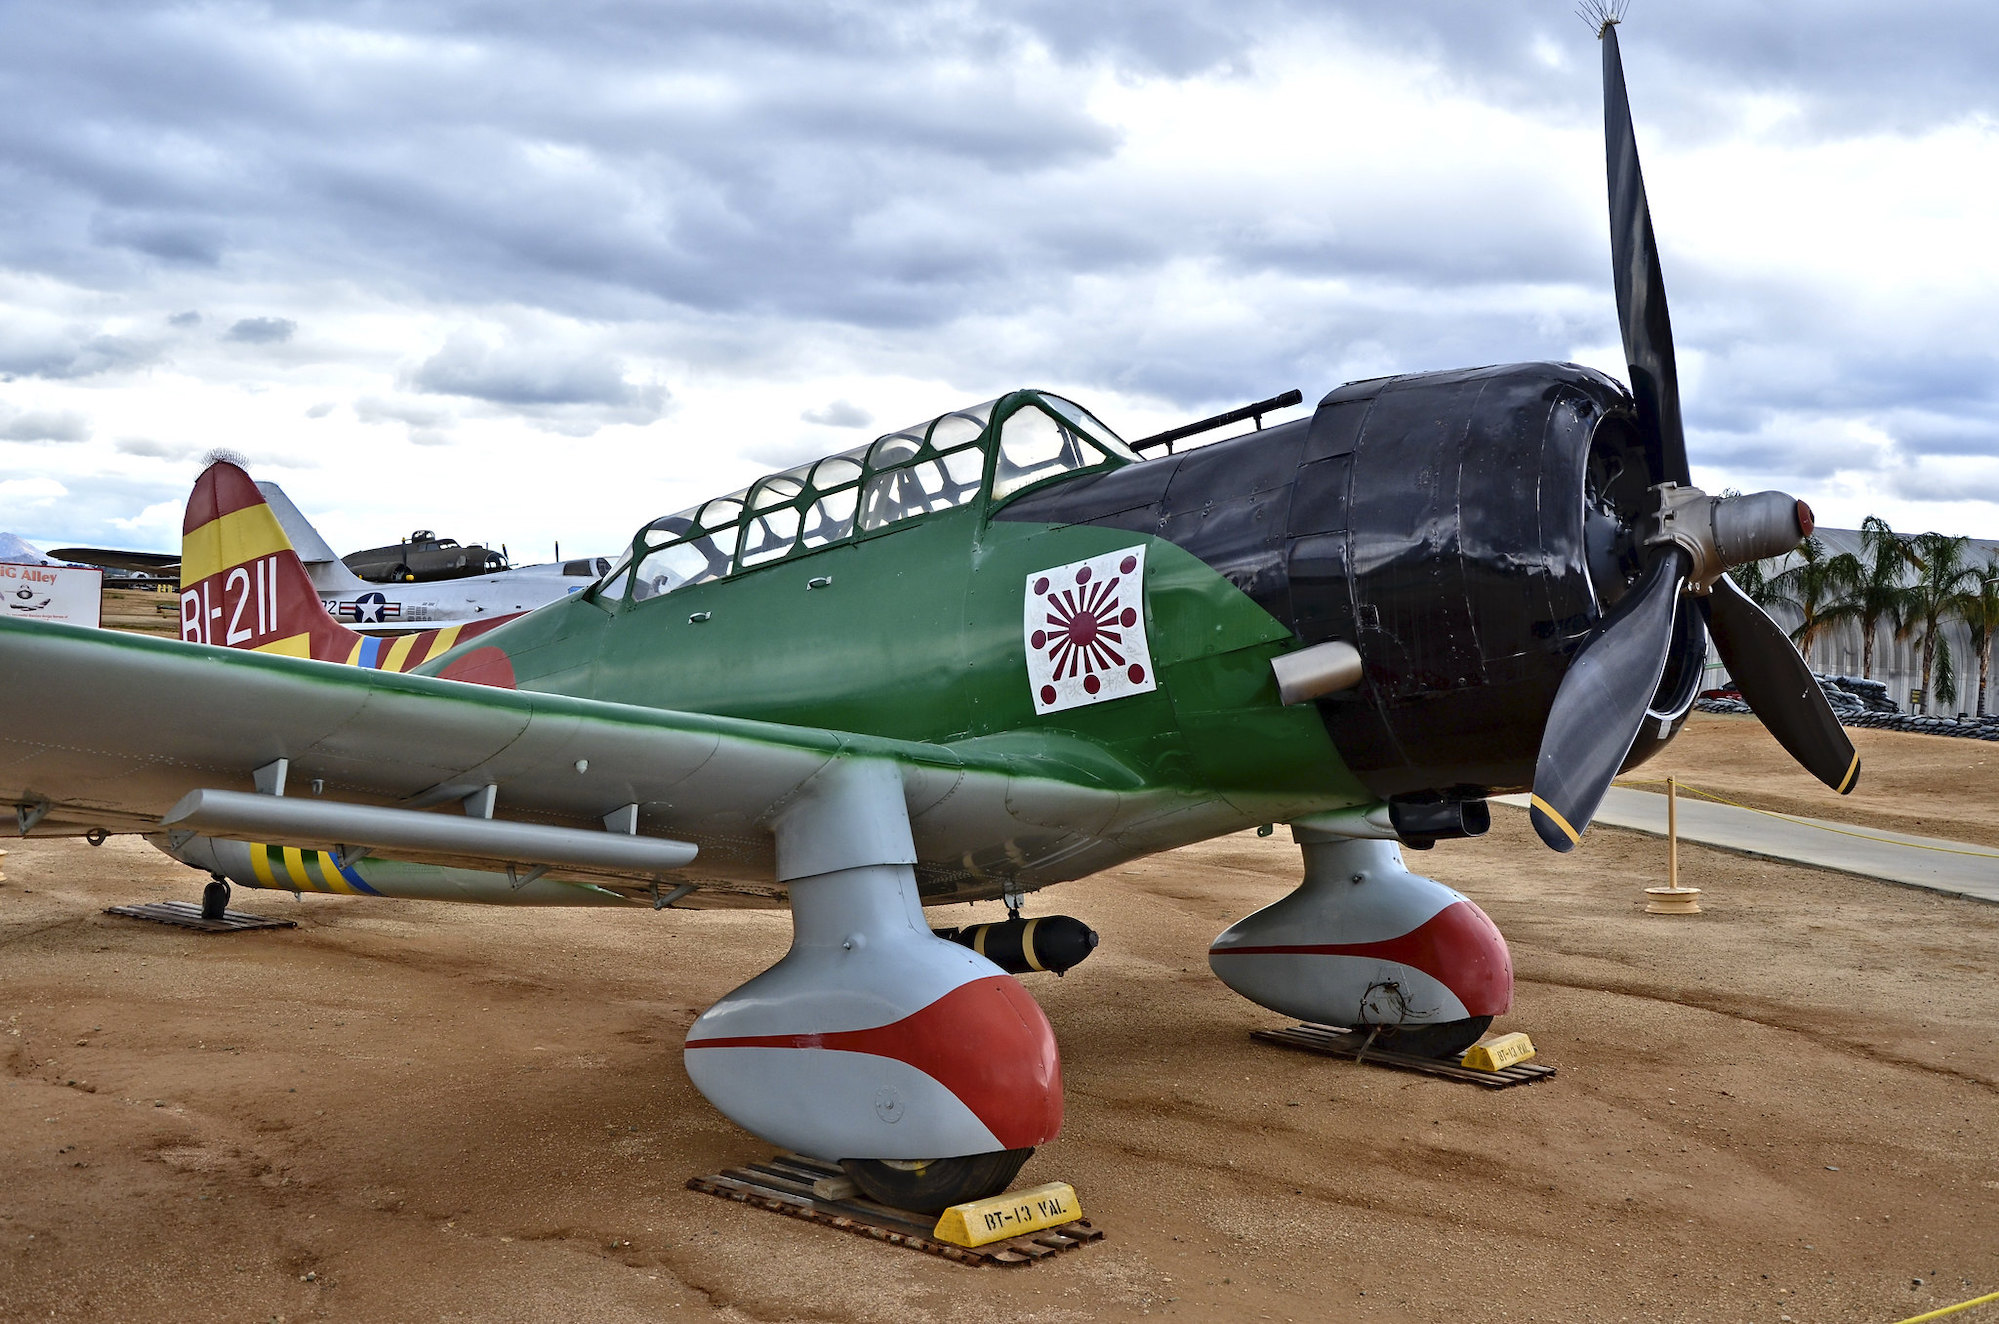 Vultee BT-13A Valiant (modified to appear as Japanese Aichi D-3 Val for 1970 movie "Tora, Tora, Tora" at March Field Air Museum